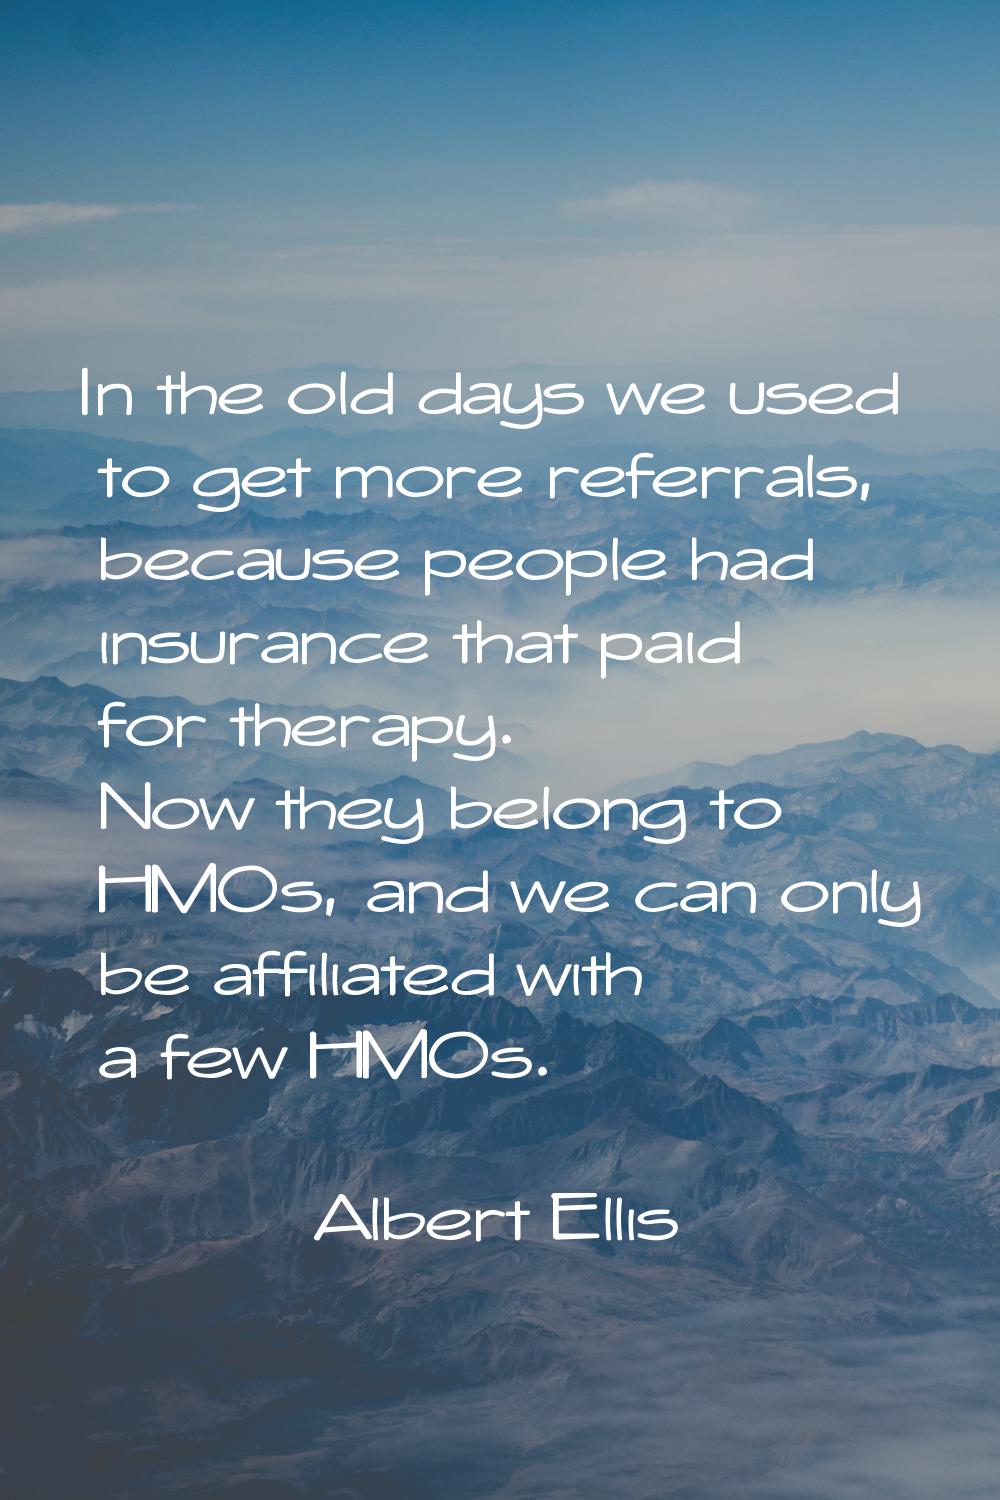 In the old days we used to get more referrals, because people had insurance that paid for therapy. 